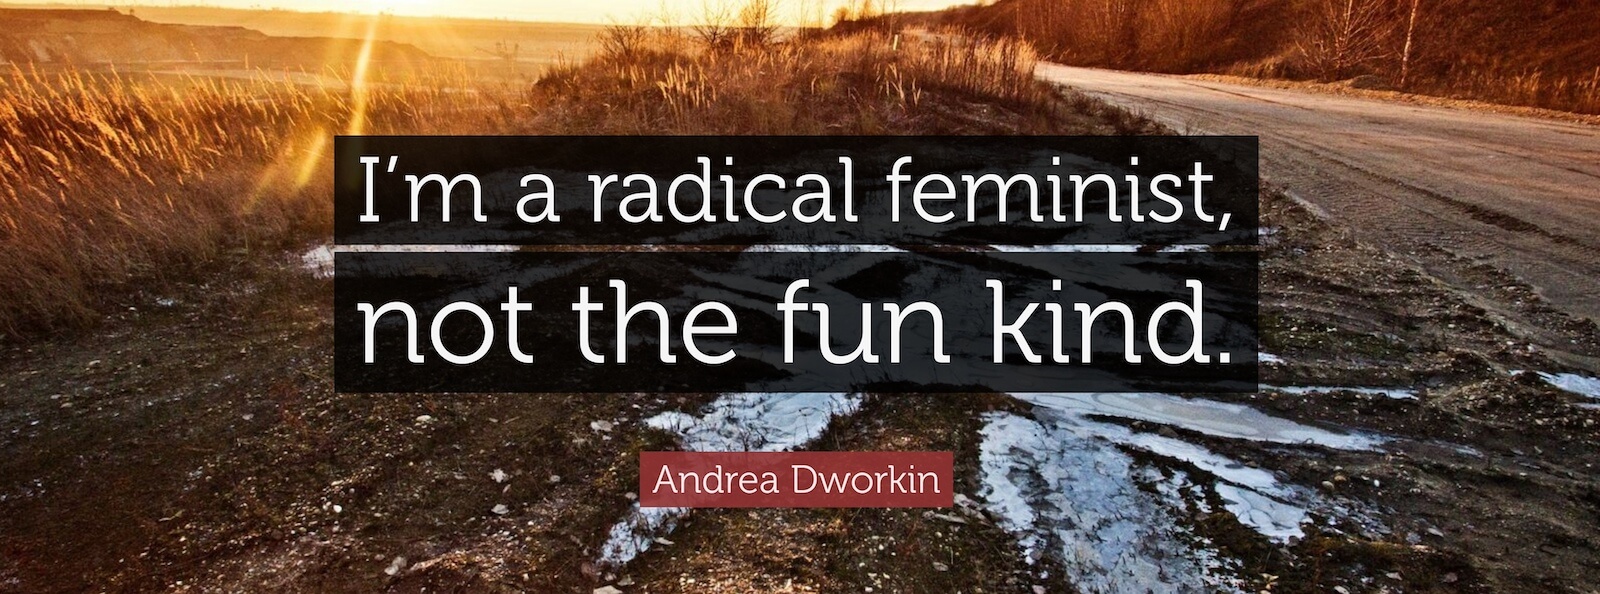 Is Dworkin’s “I Want A Twenty-Four Truce During Which There Is No Rape” Radical Or Reactionary?